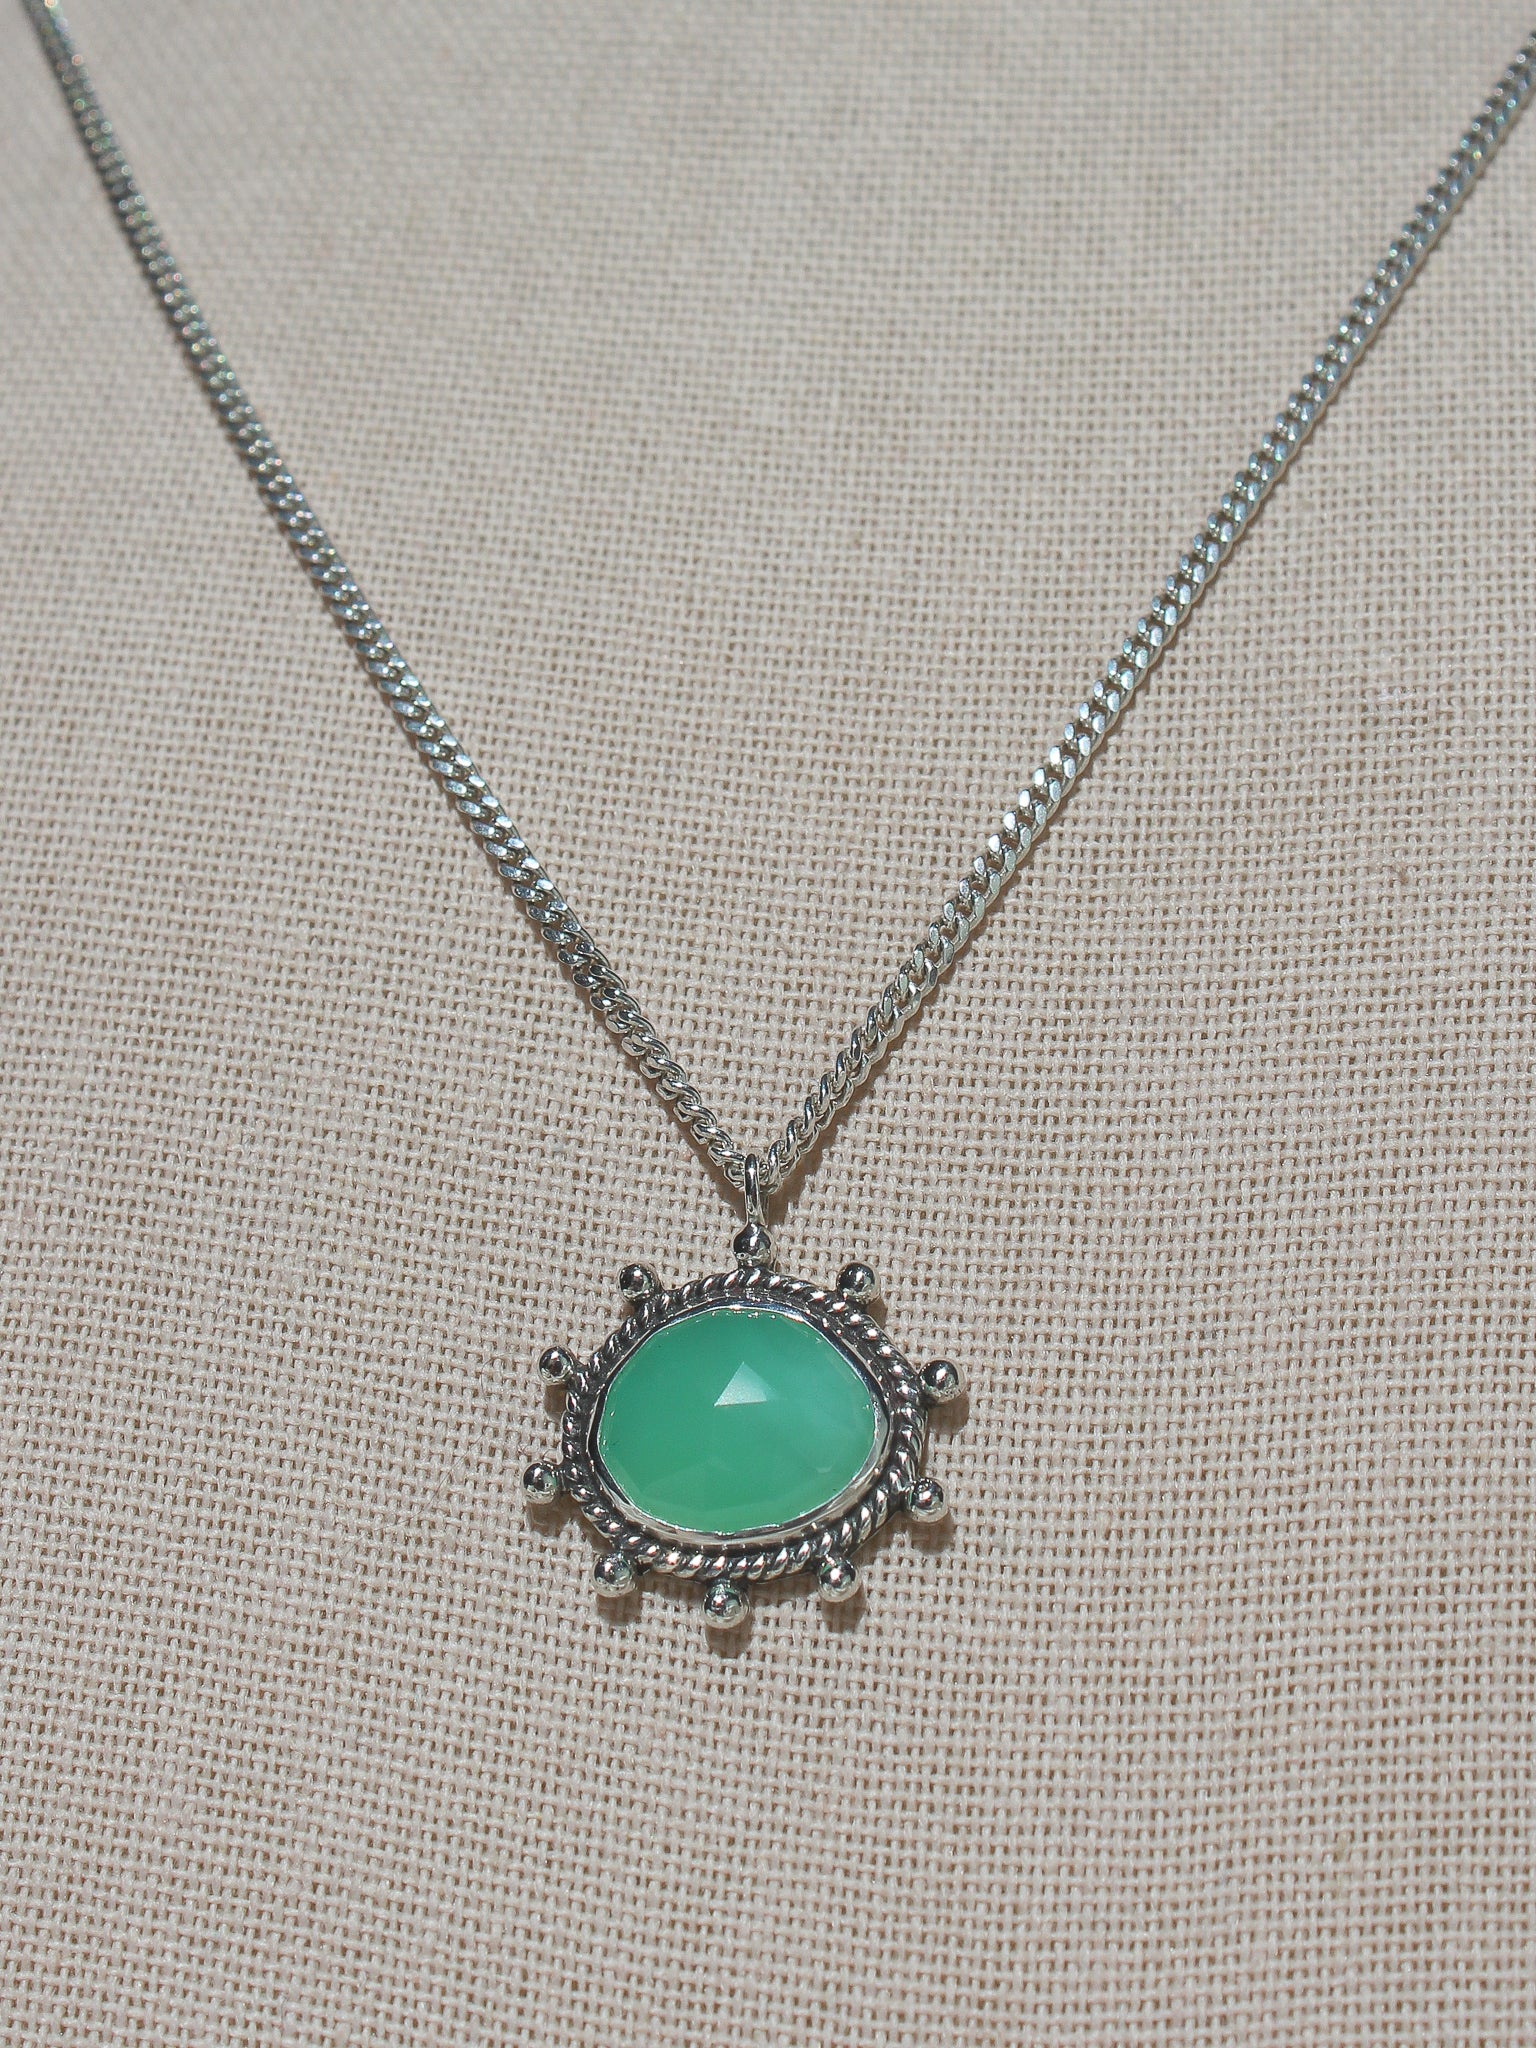 Handmade 925 sterling silver pendant with faceted chrysoprase stone affordable lily and William jewelry